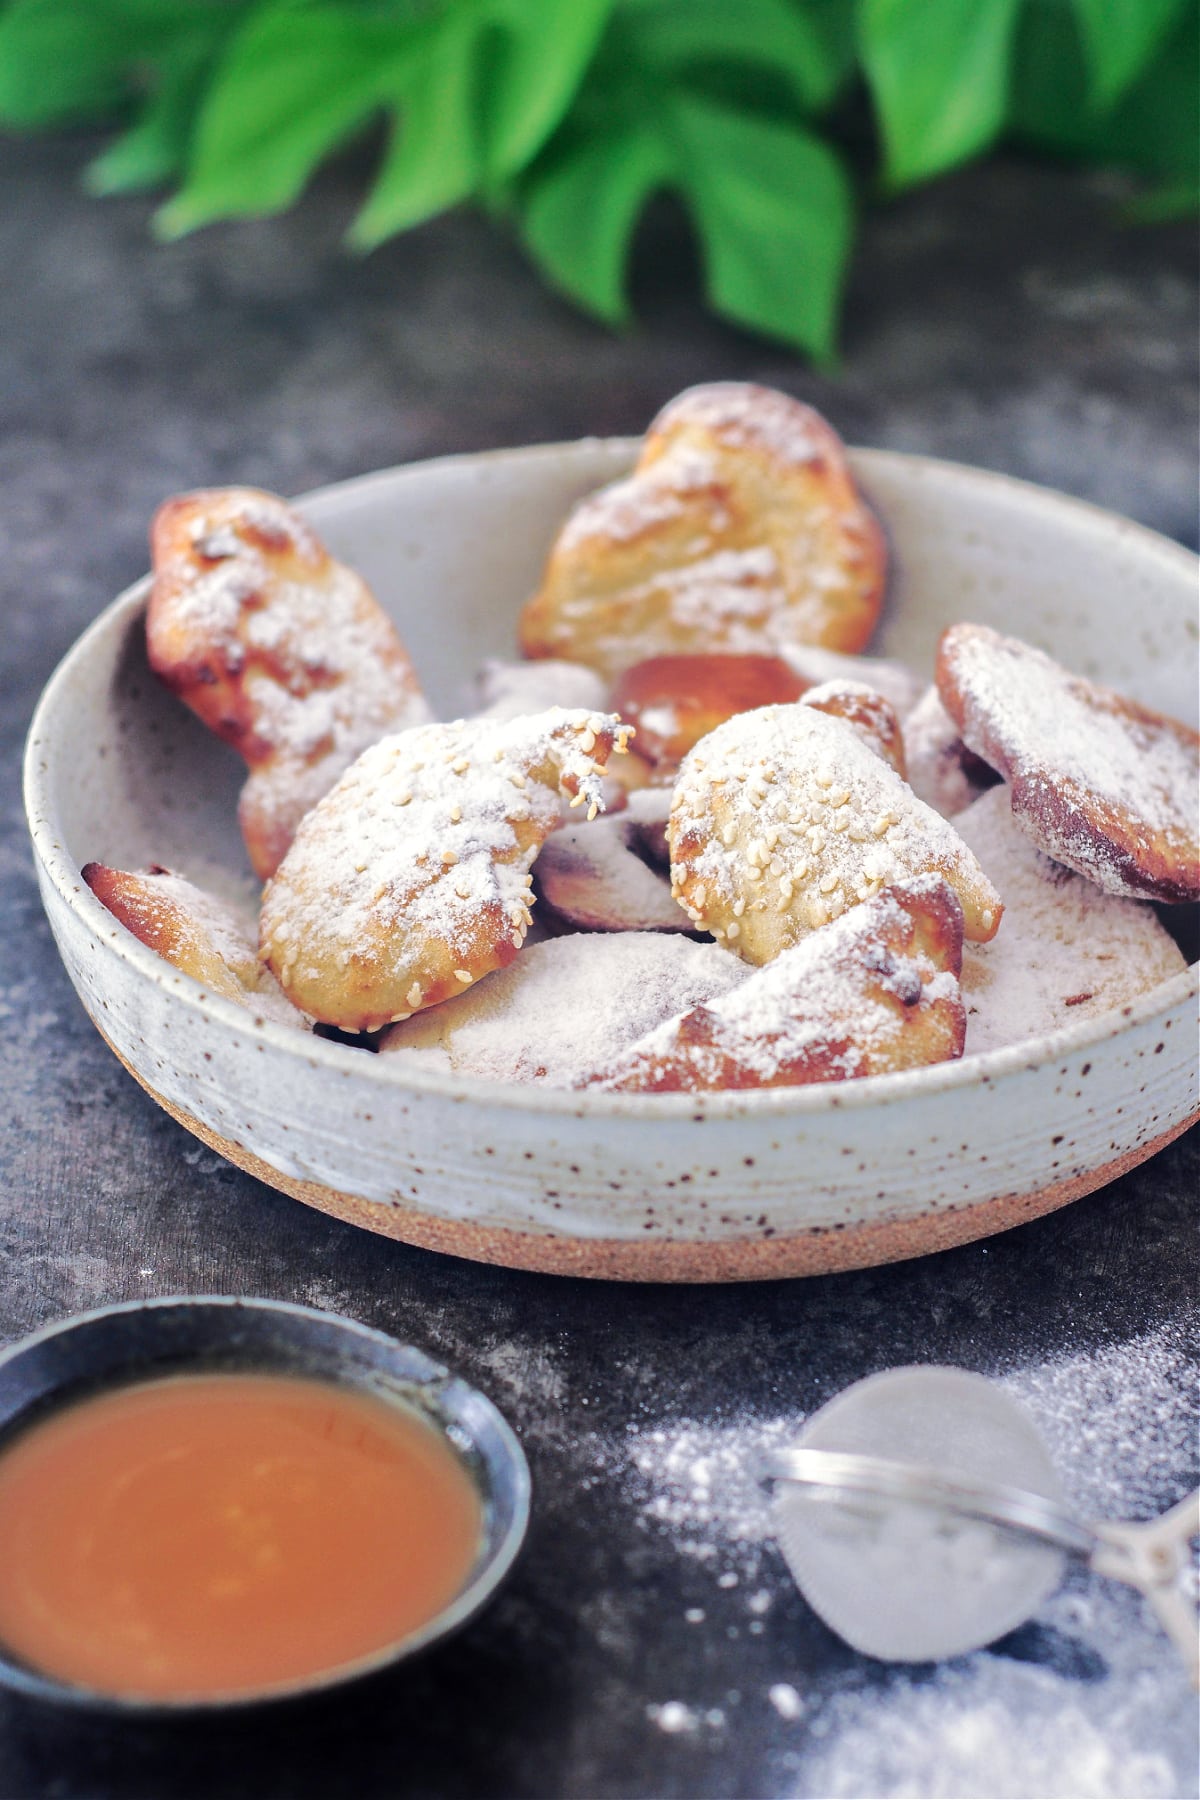 A shallow grey bowl of air fried banana fritters dusted with powdered sugar. A smaller bowl of caramel sauce and a mesh strainer for powdered sugar sit next to the bowl of fritters.